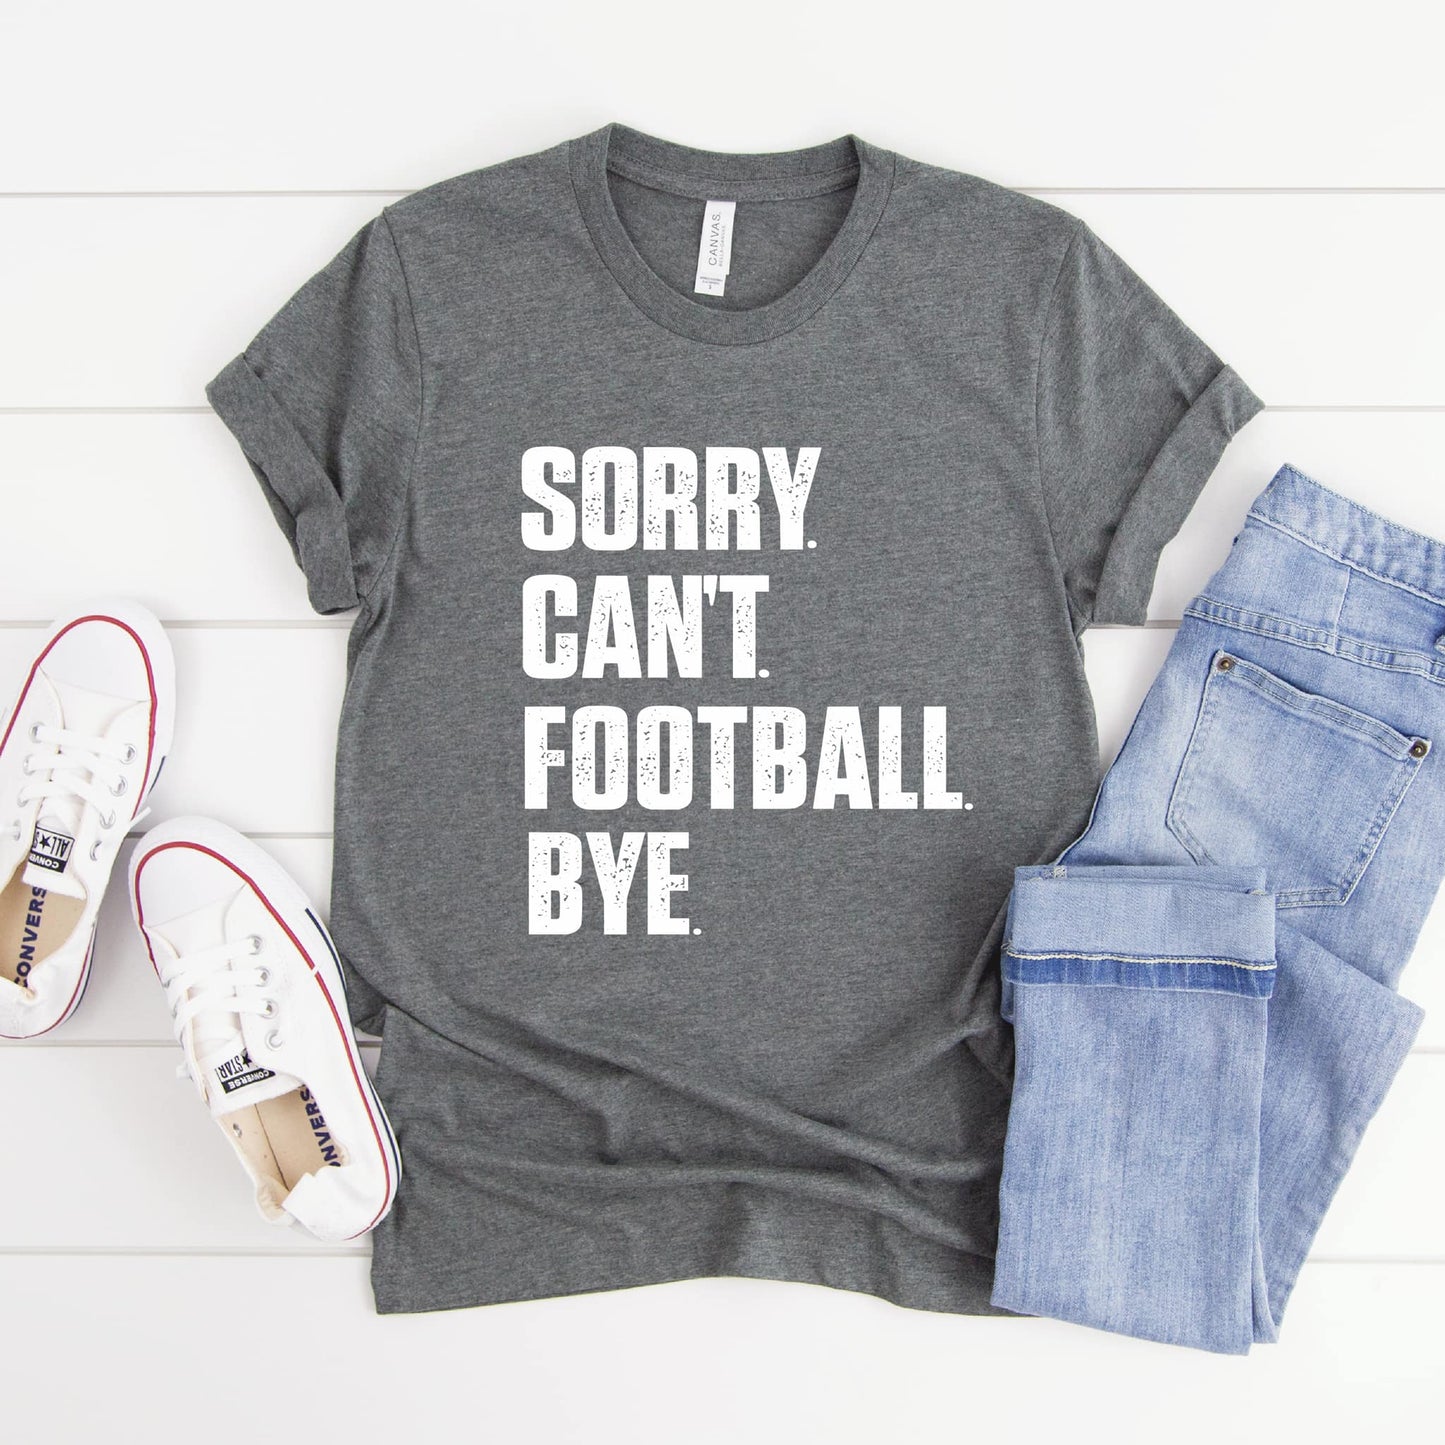 Sorry. Can't. Football.